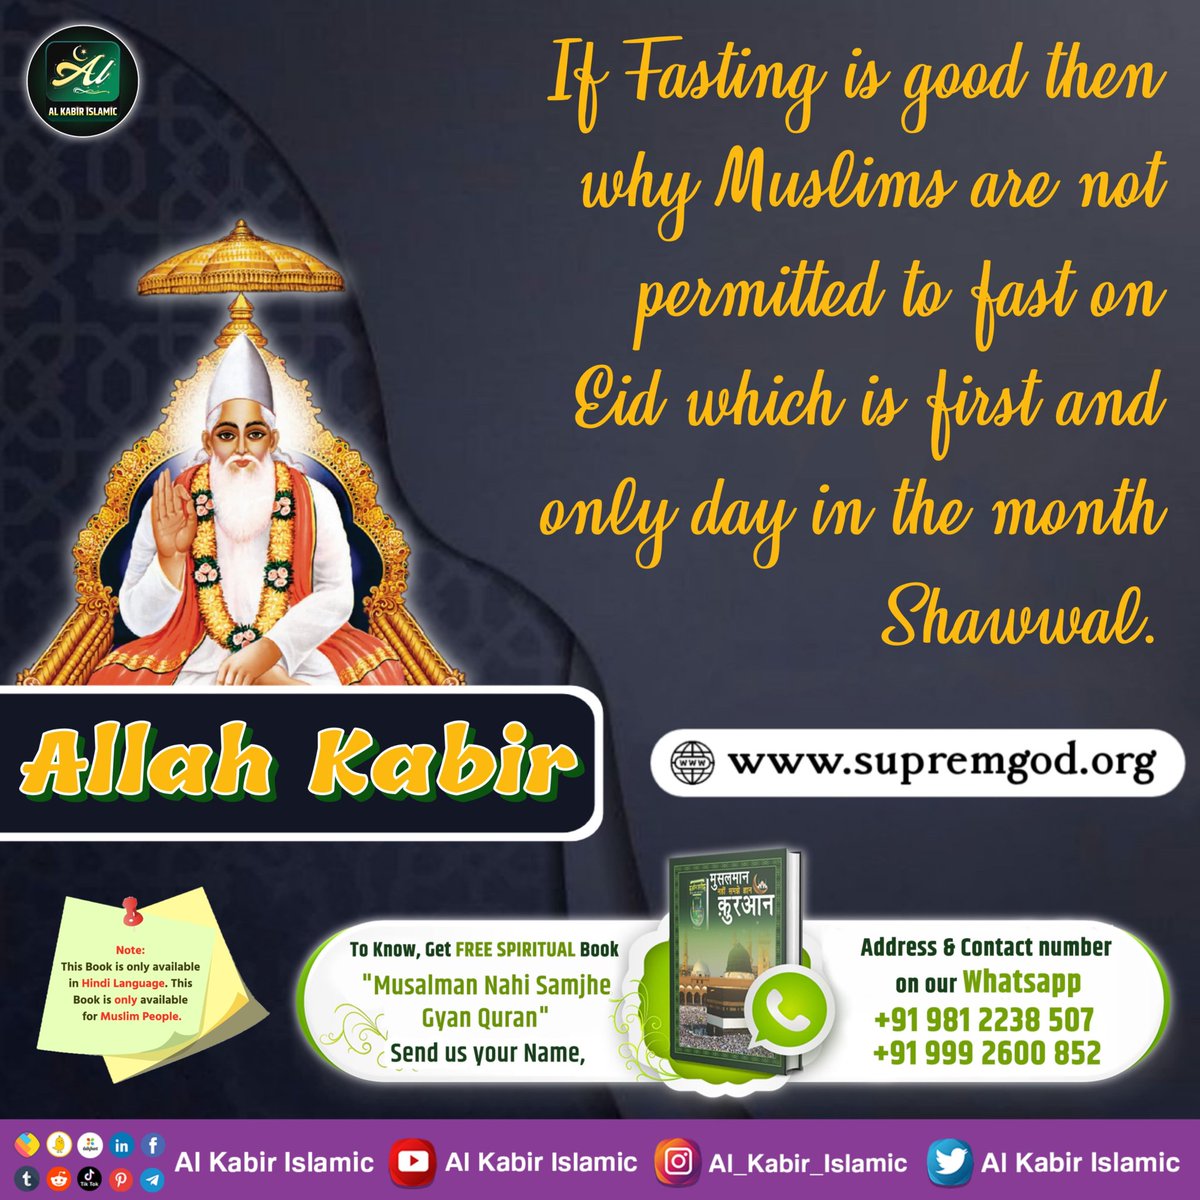 If Fasting is good then why Muslims are not permitted to fast on Eid which is first and only day in the month Shawwal?
#AlKabir_Islamic
#SaintRampalJiMaharaj
.
.
.
@Nishant00012